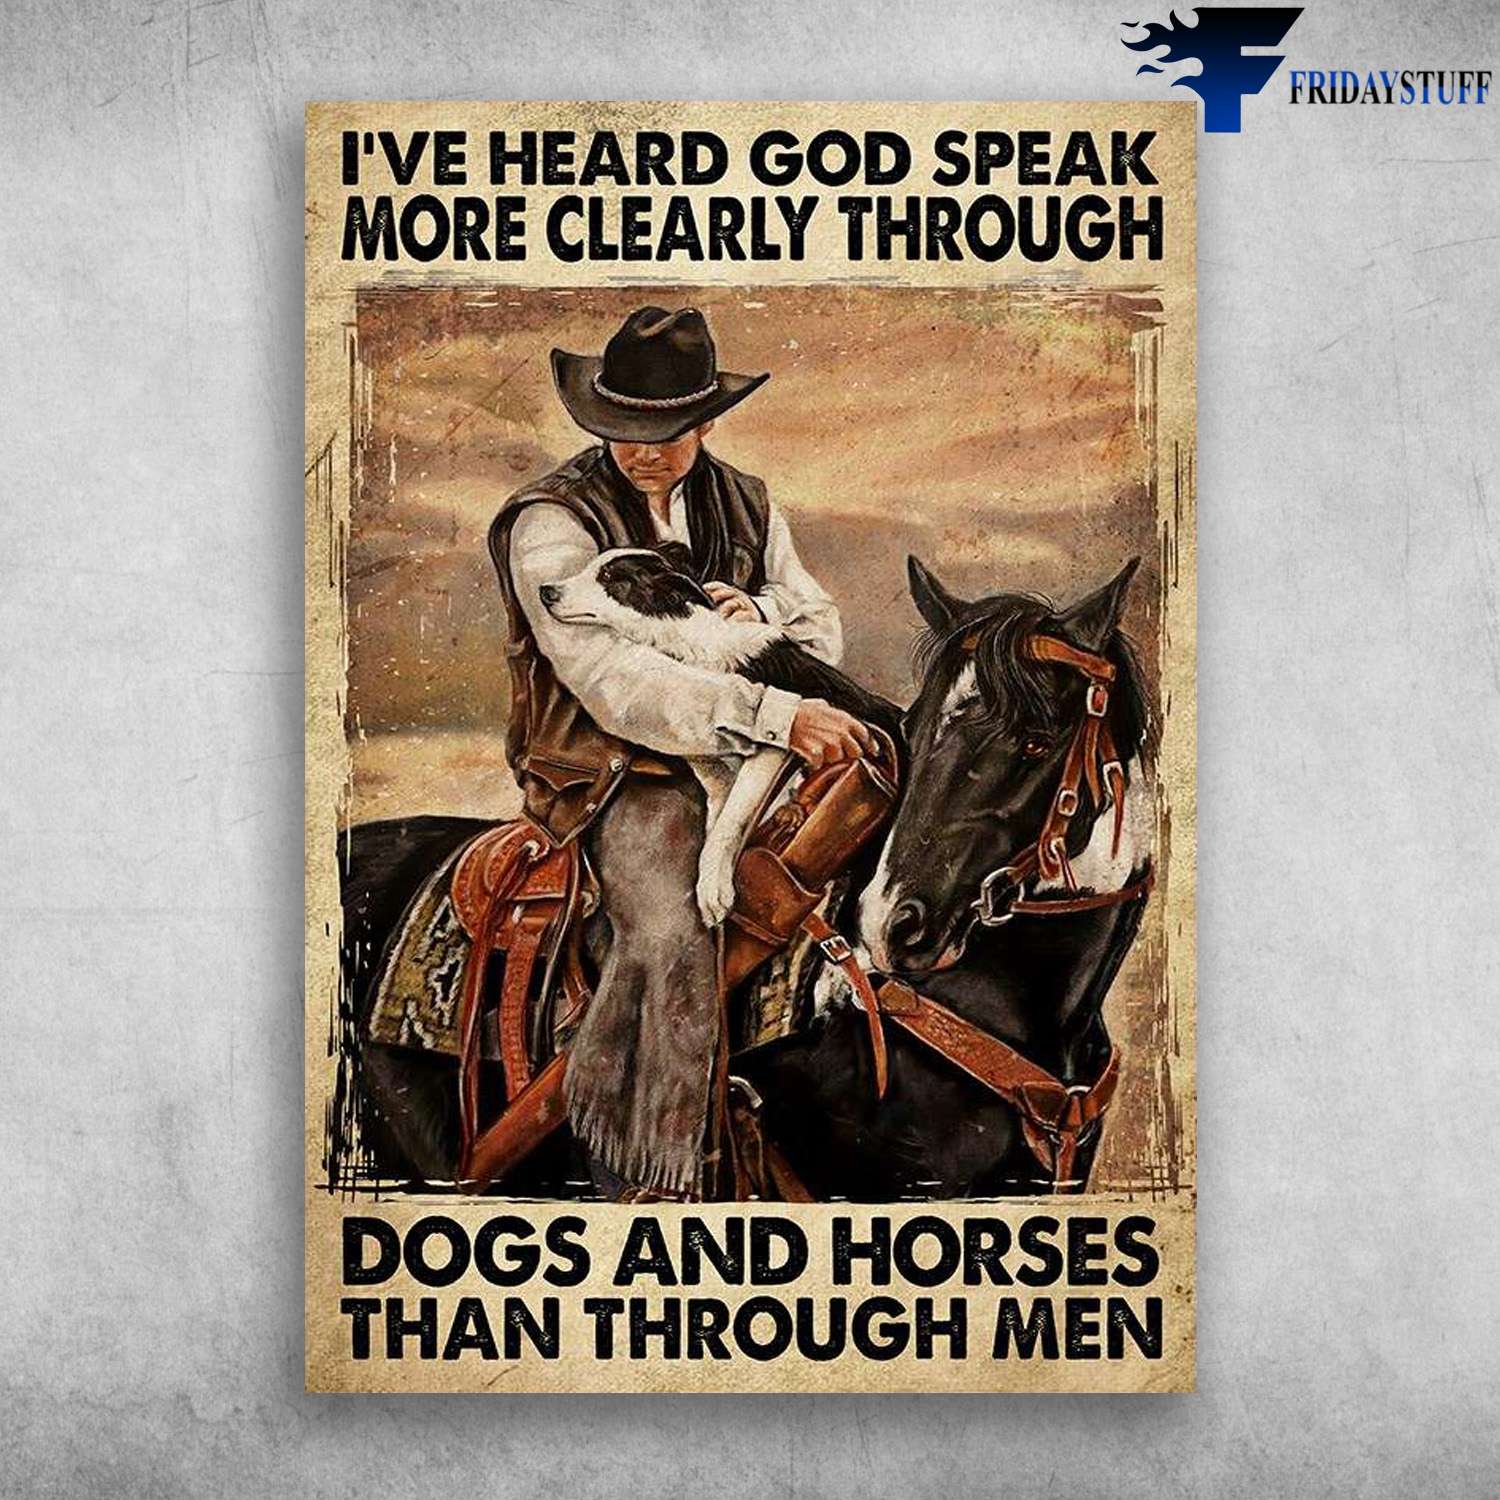 Cowboy Horse, Sleeping Dog - I've Heard God Speak More Clearly, Through Dogs And Horses, Than Through Men